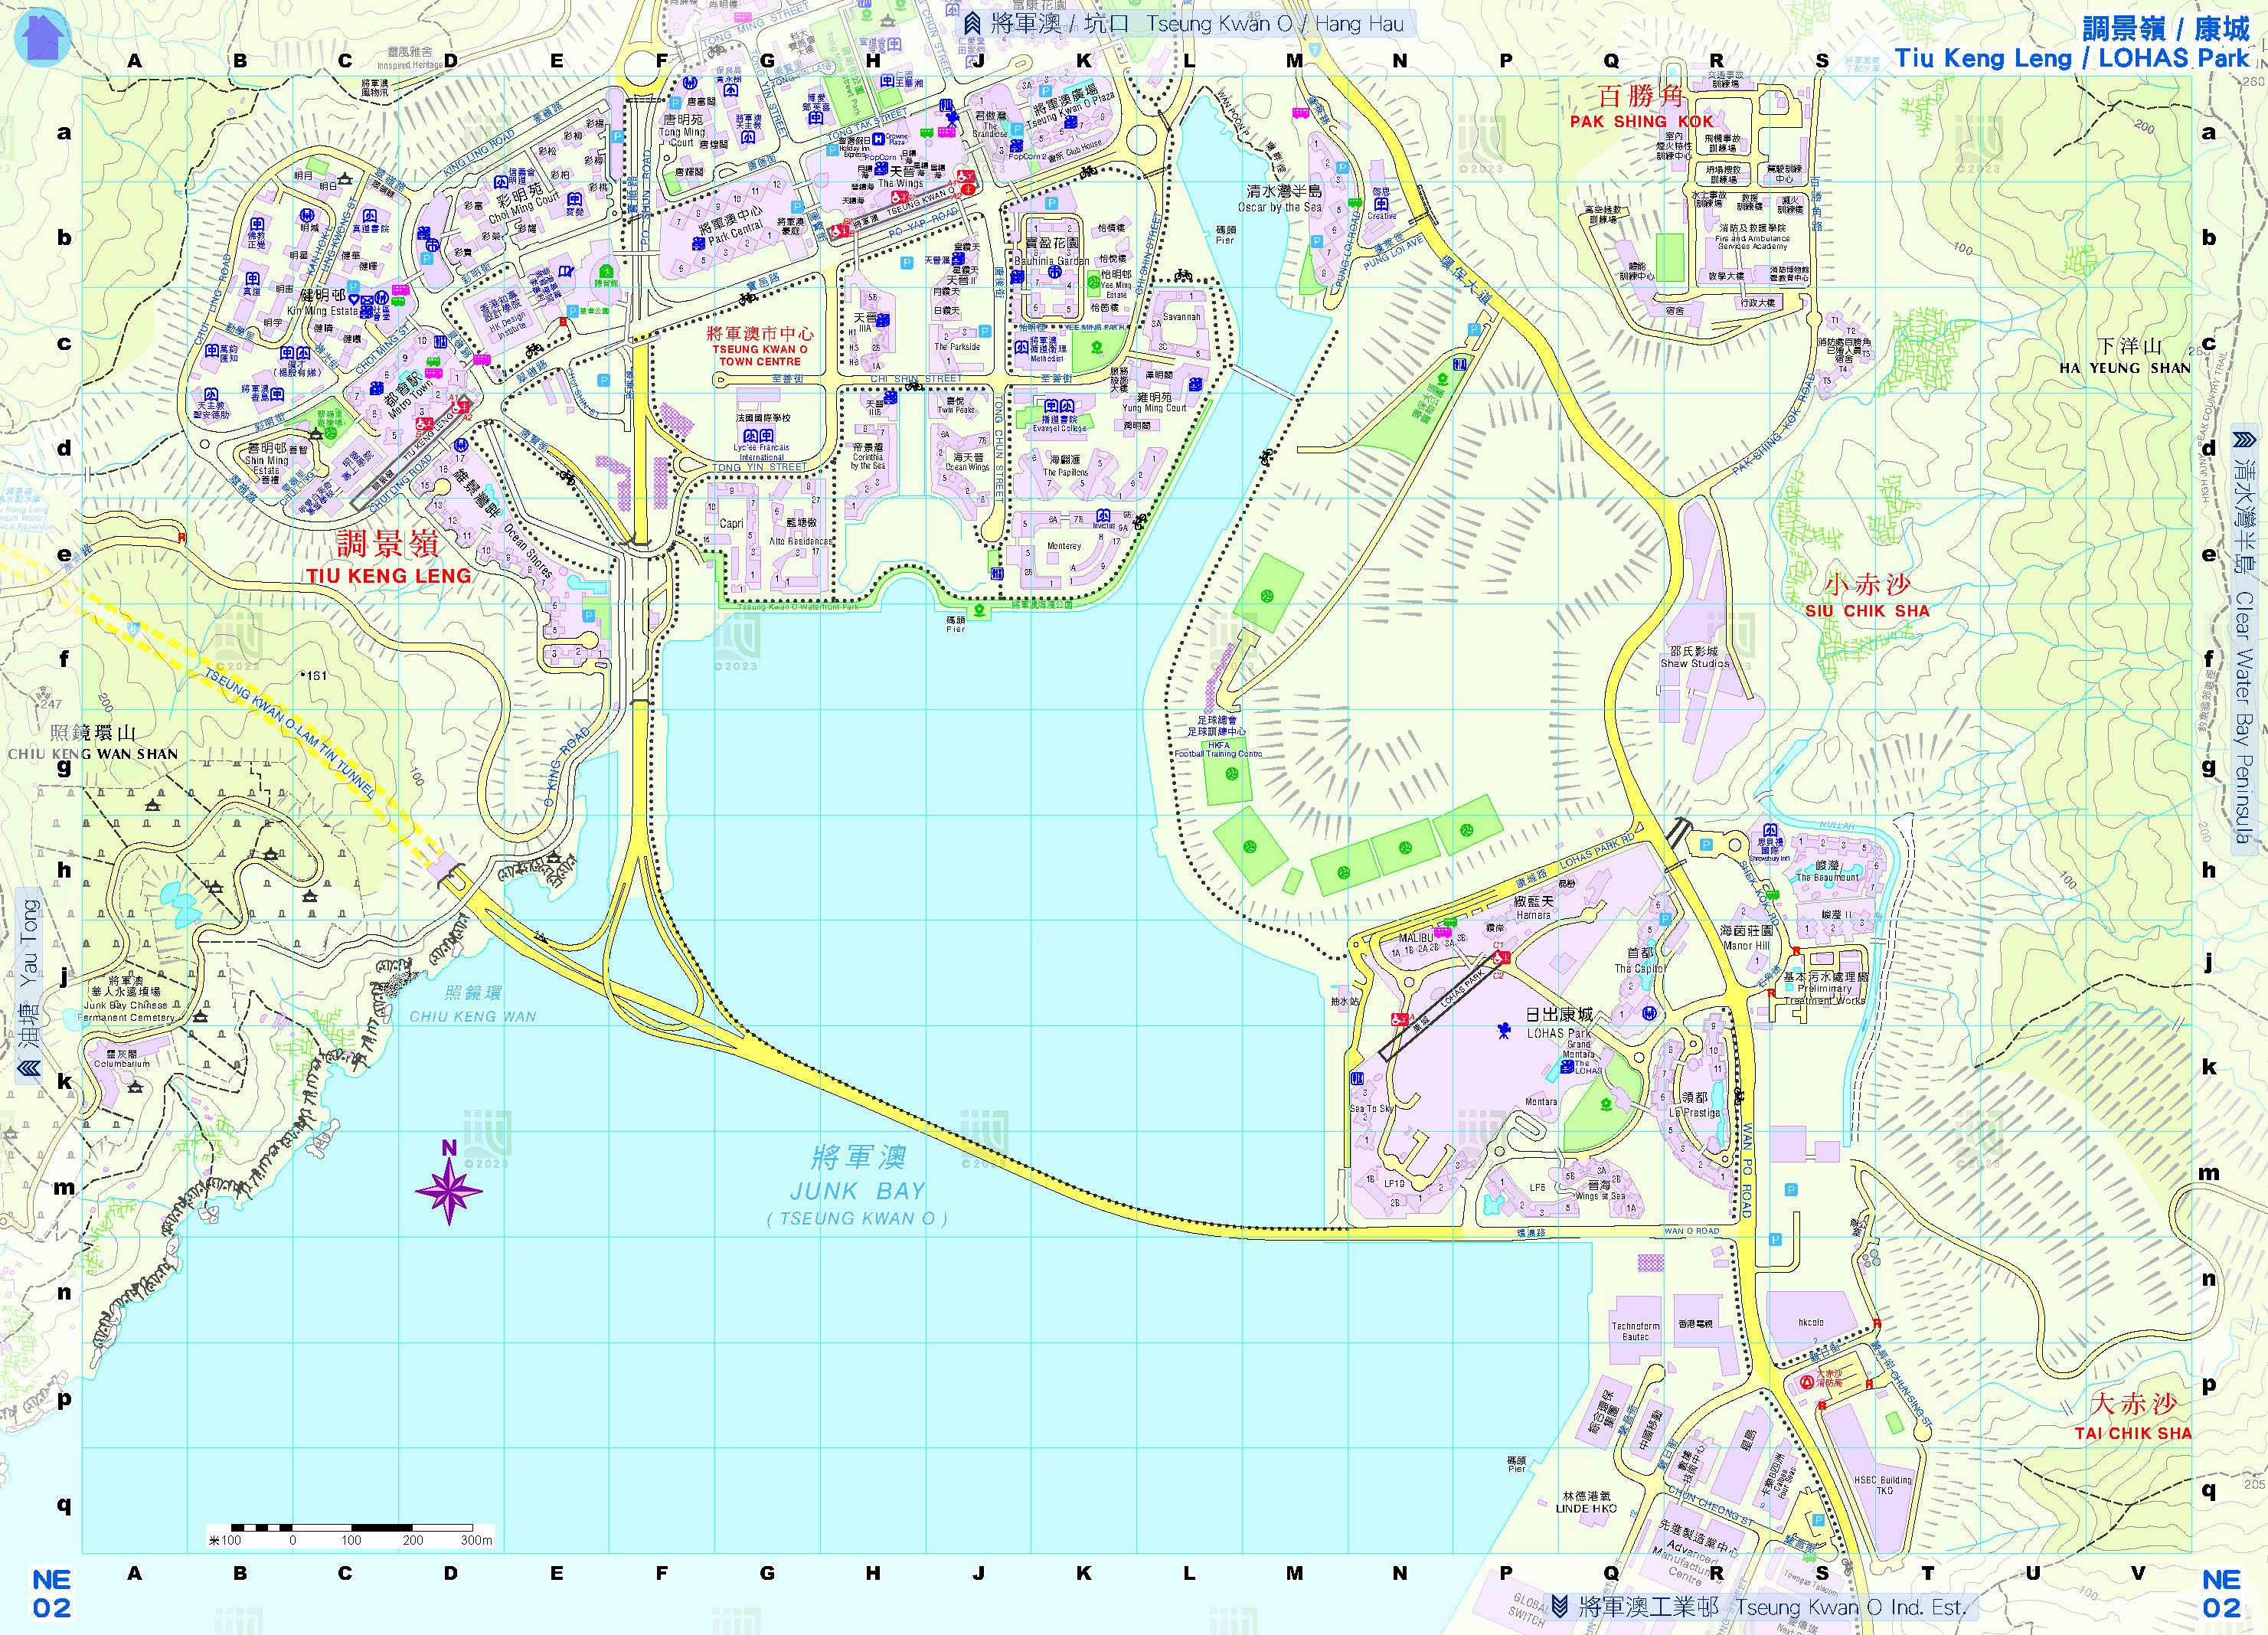 The "e-HongKongGuide" 2023 is available for free download today (January 31). It provides detailed maps of Hong Kong. Picture shows a map of the Tiu Keng Leng and LOHAS Park area.